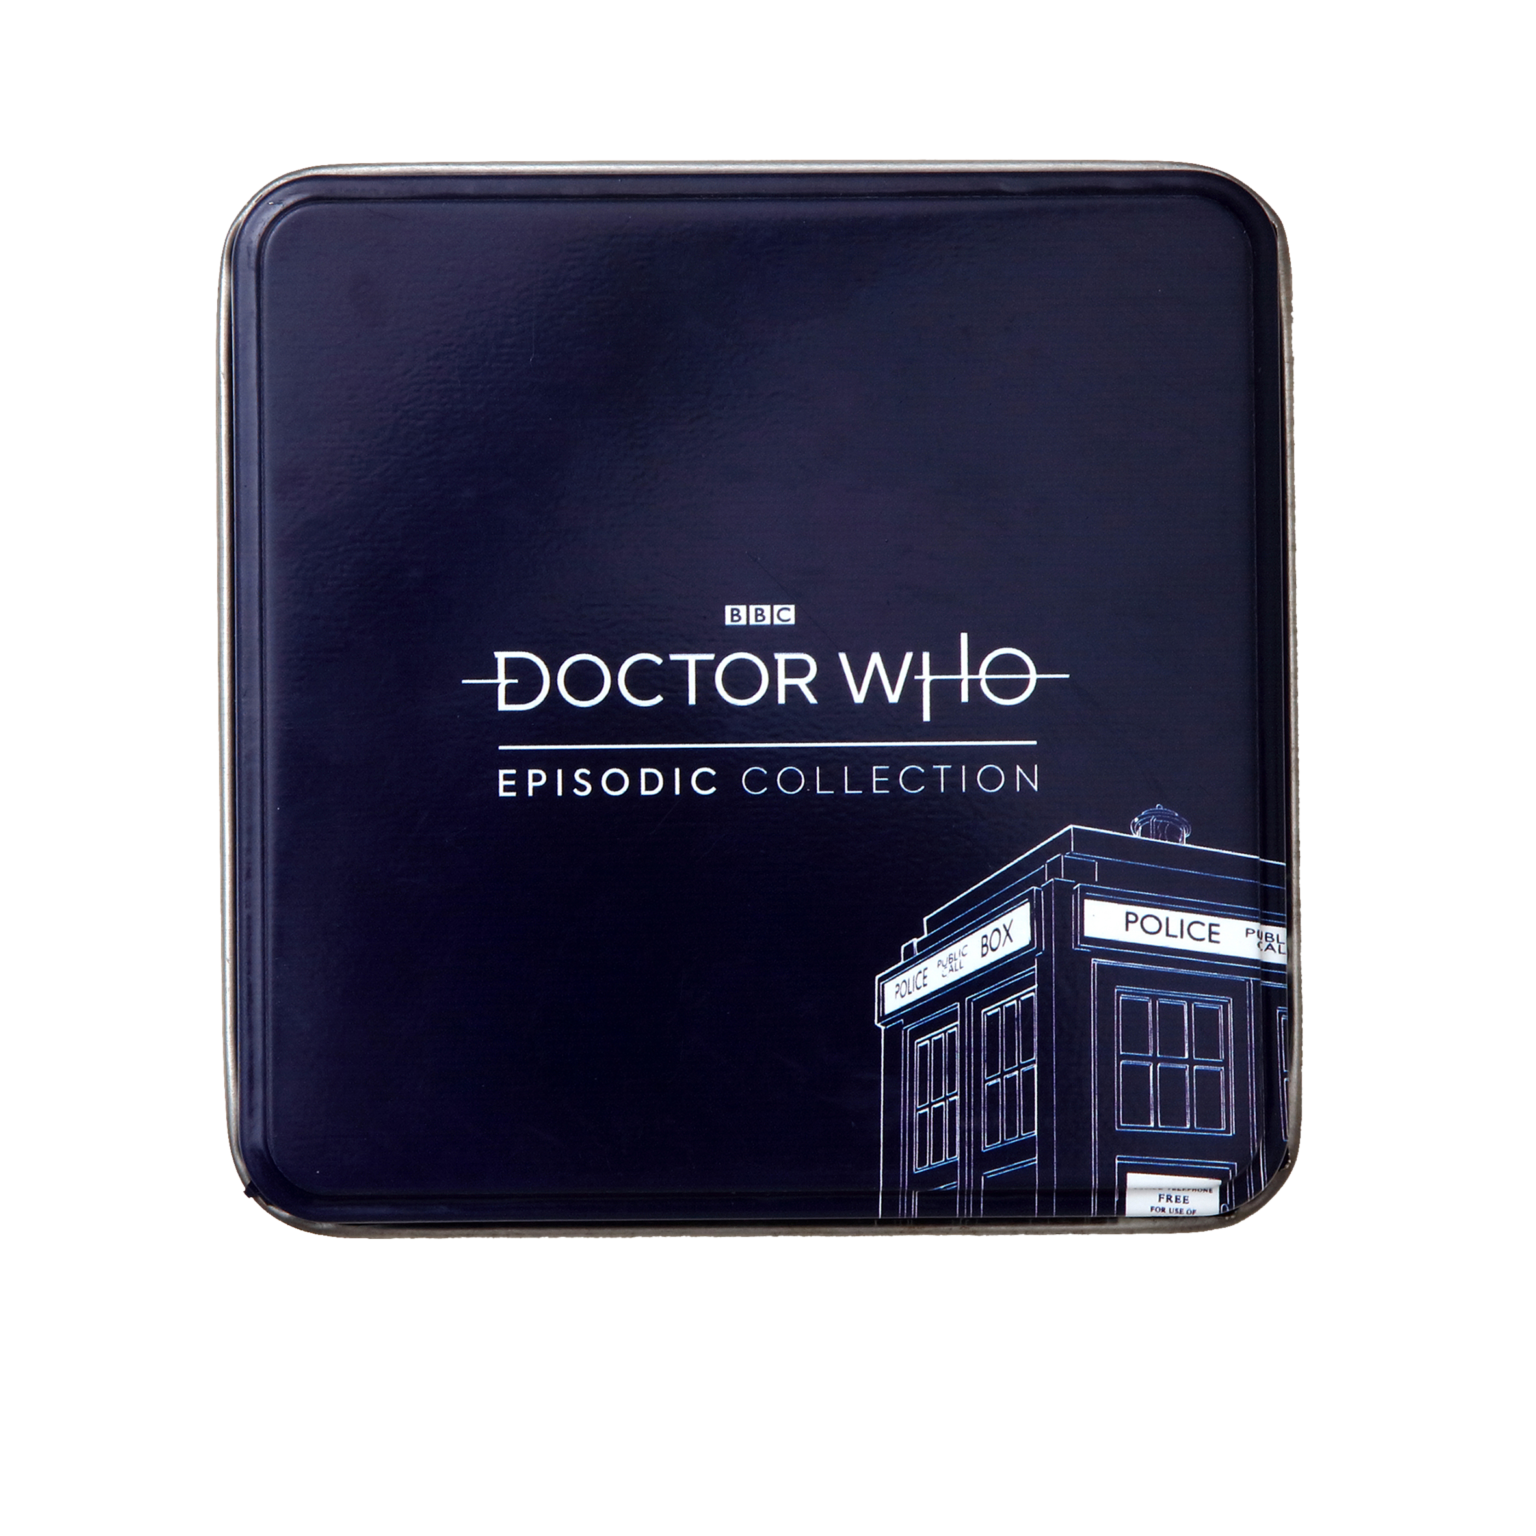 HERO COLLECTOR LAUNCHES BRAND NEW DOCTOR WHO ADVENT CALENDAR First